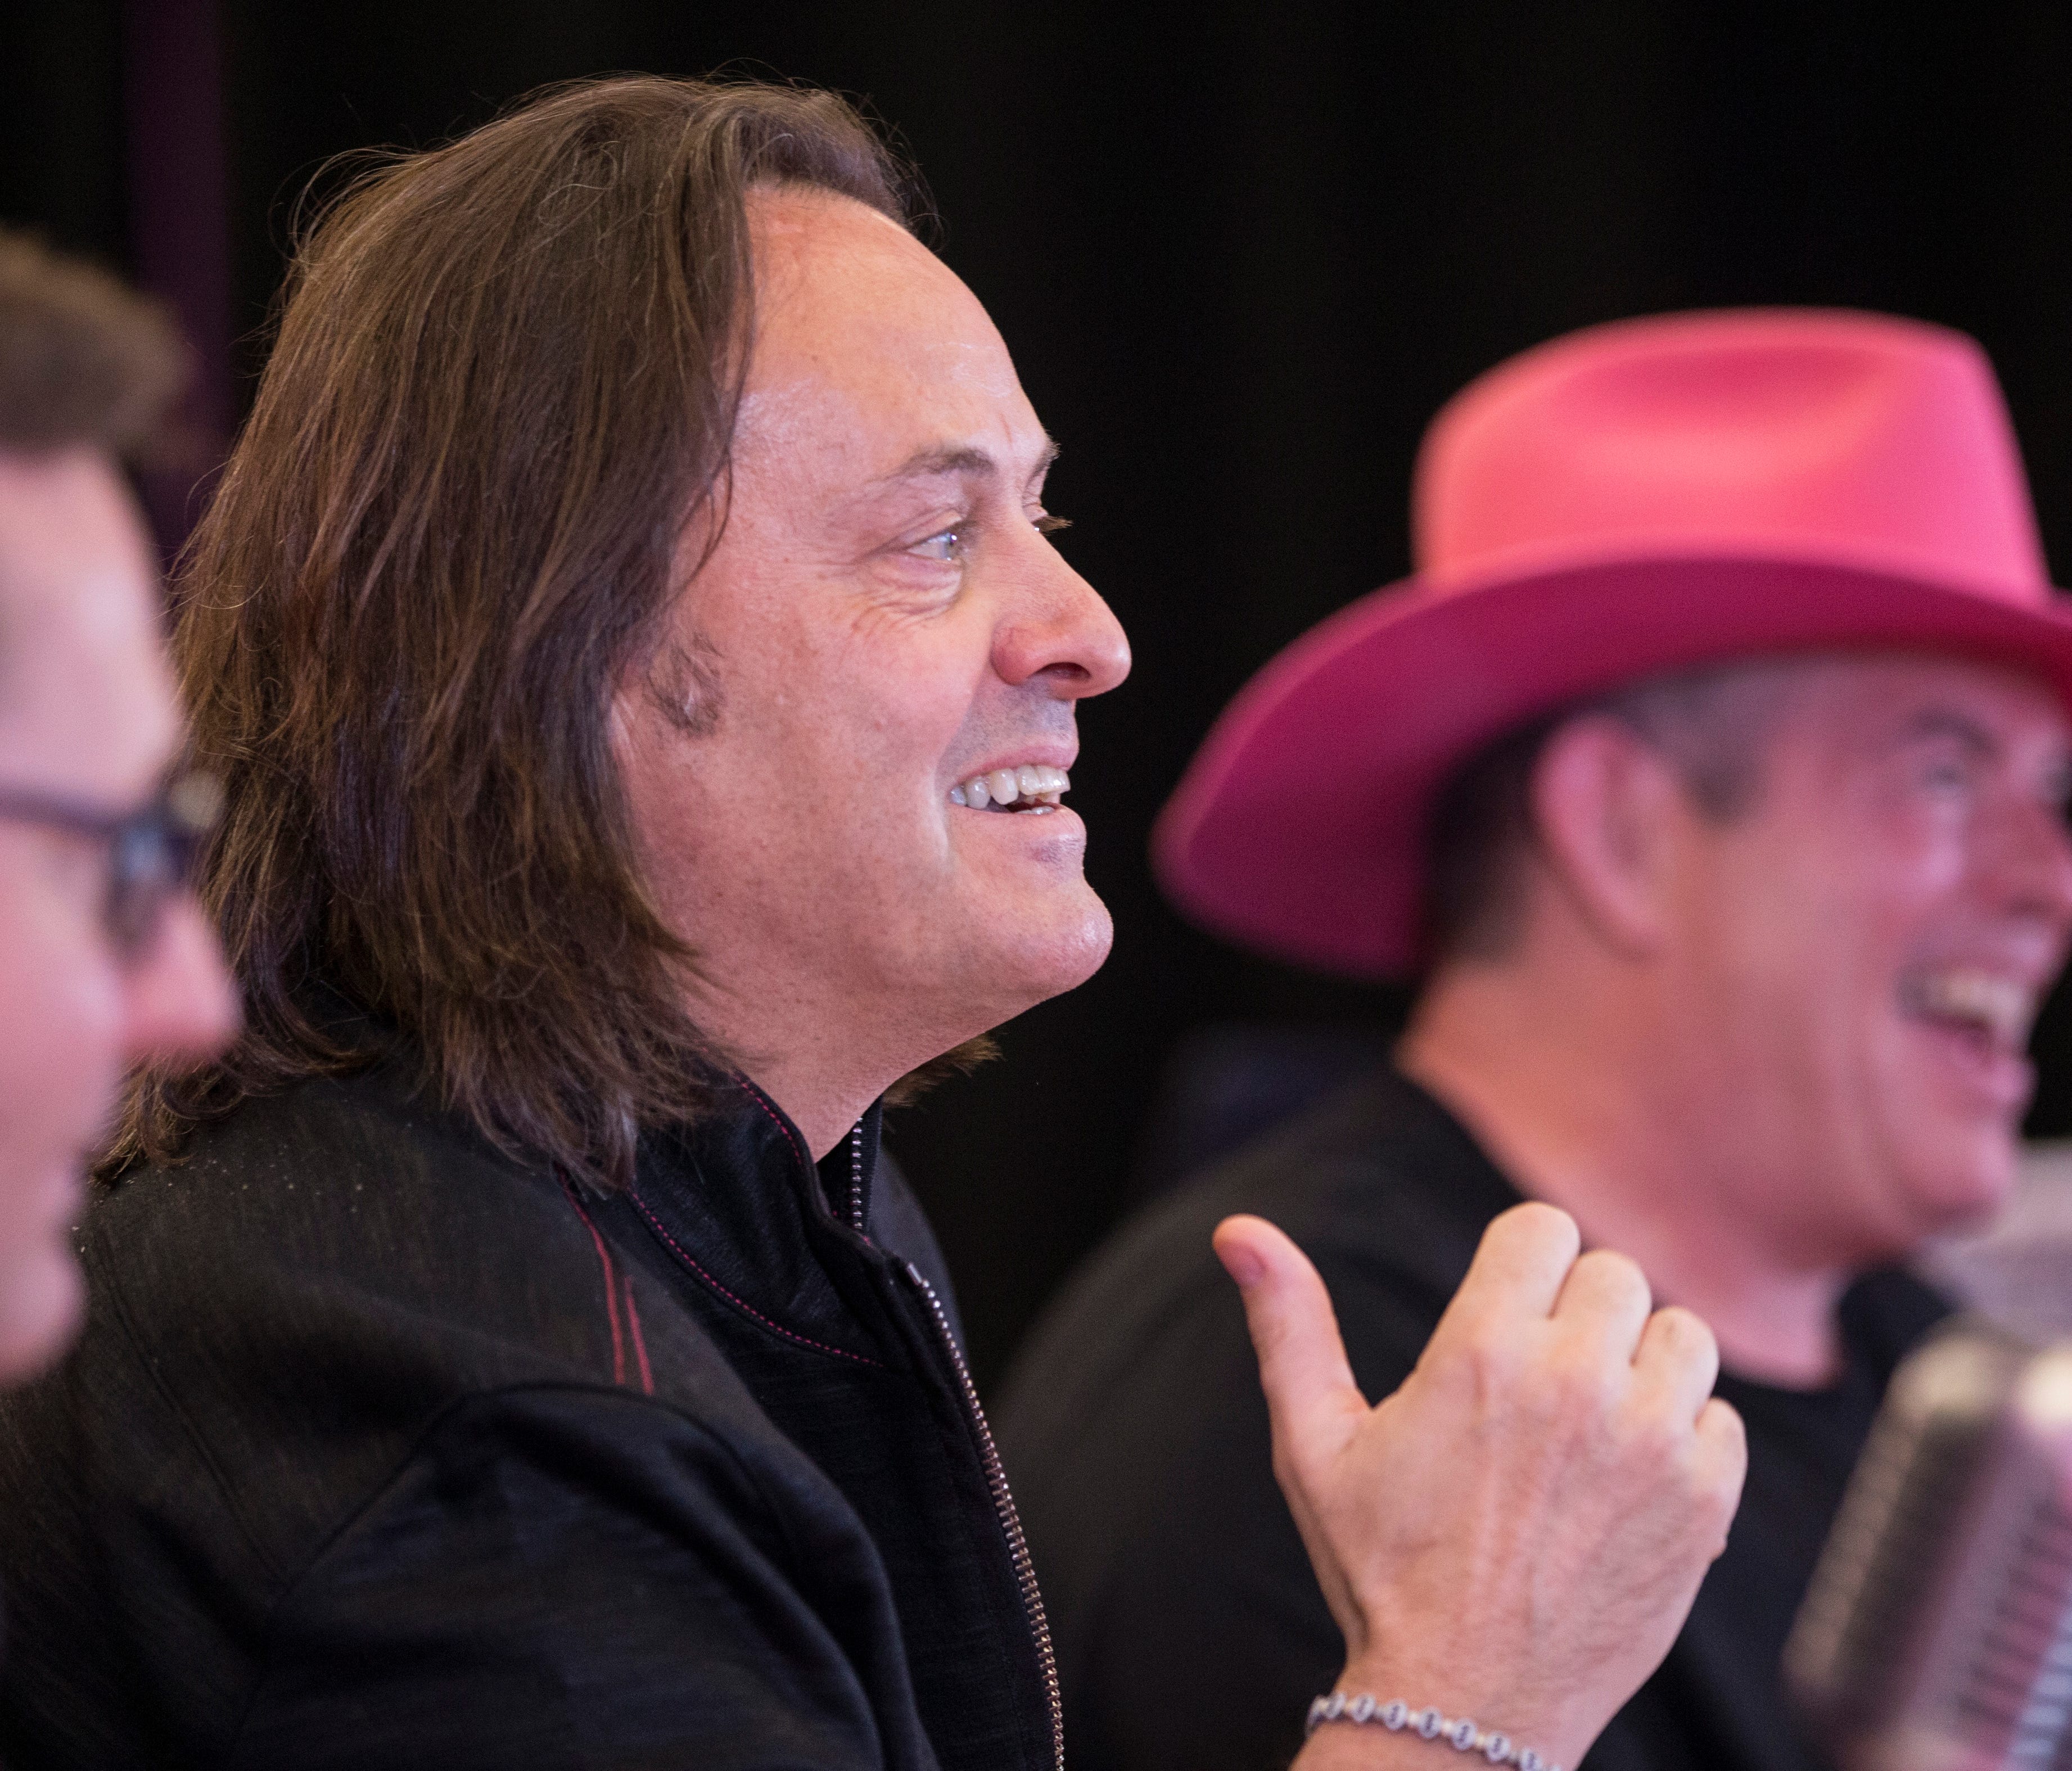 T-Mobile President and CEO John Legere, center, along with T-Mobile Chief Operating Officer Mike Sievert, left, and T-Mobile CFO Braxton Carter, right.